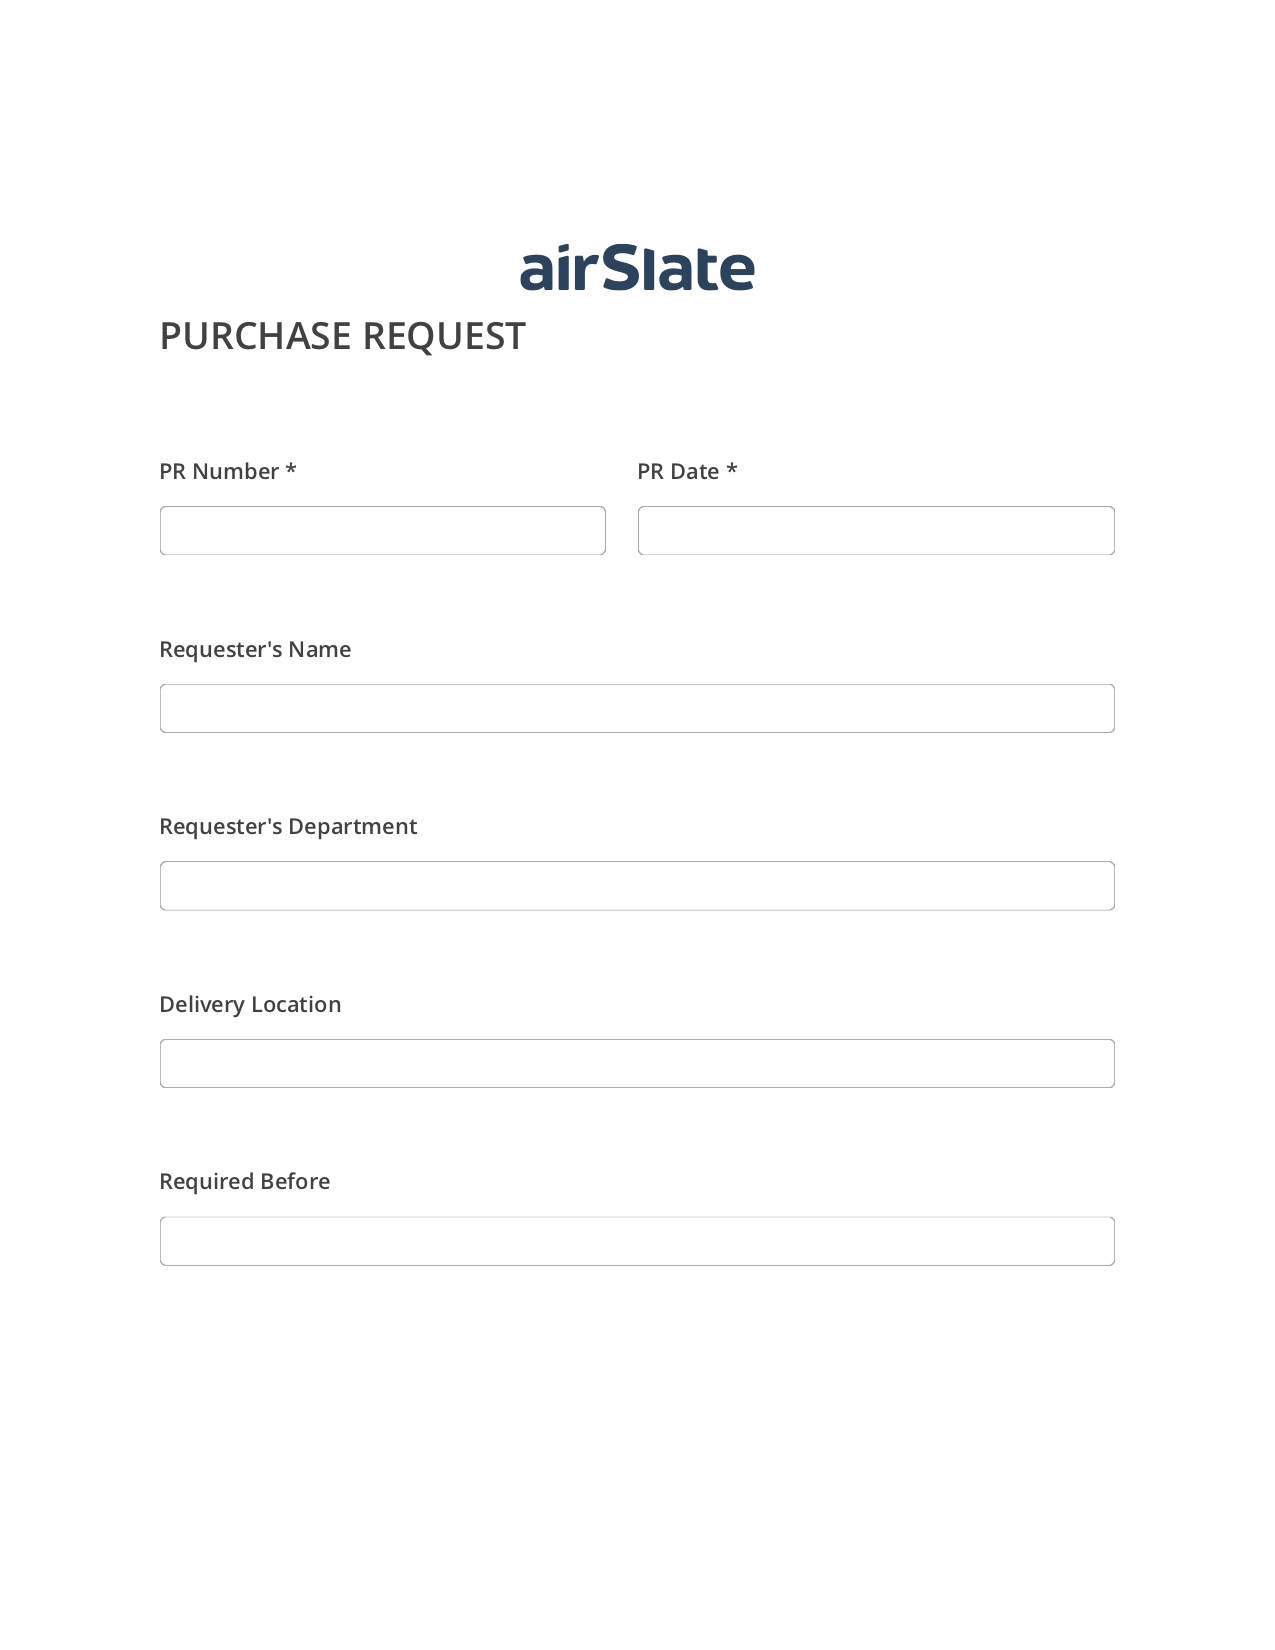 Item Purchase Request Flow Notify Salesforce Contacts - Post-finish Bot